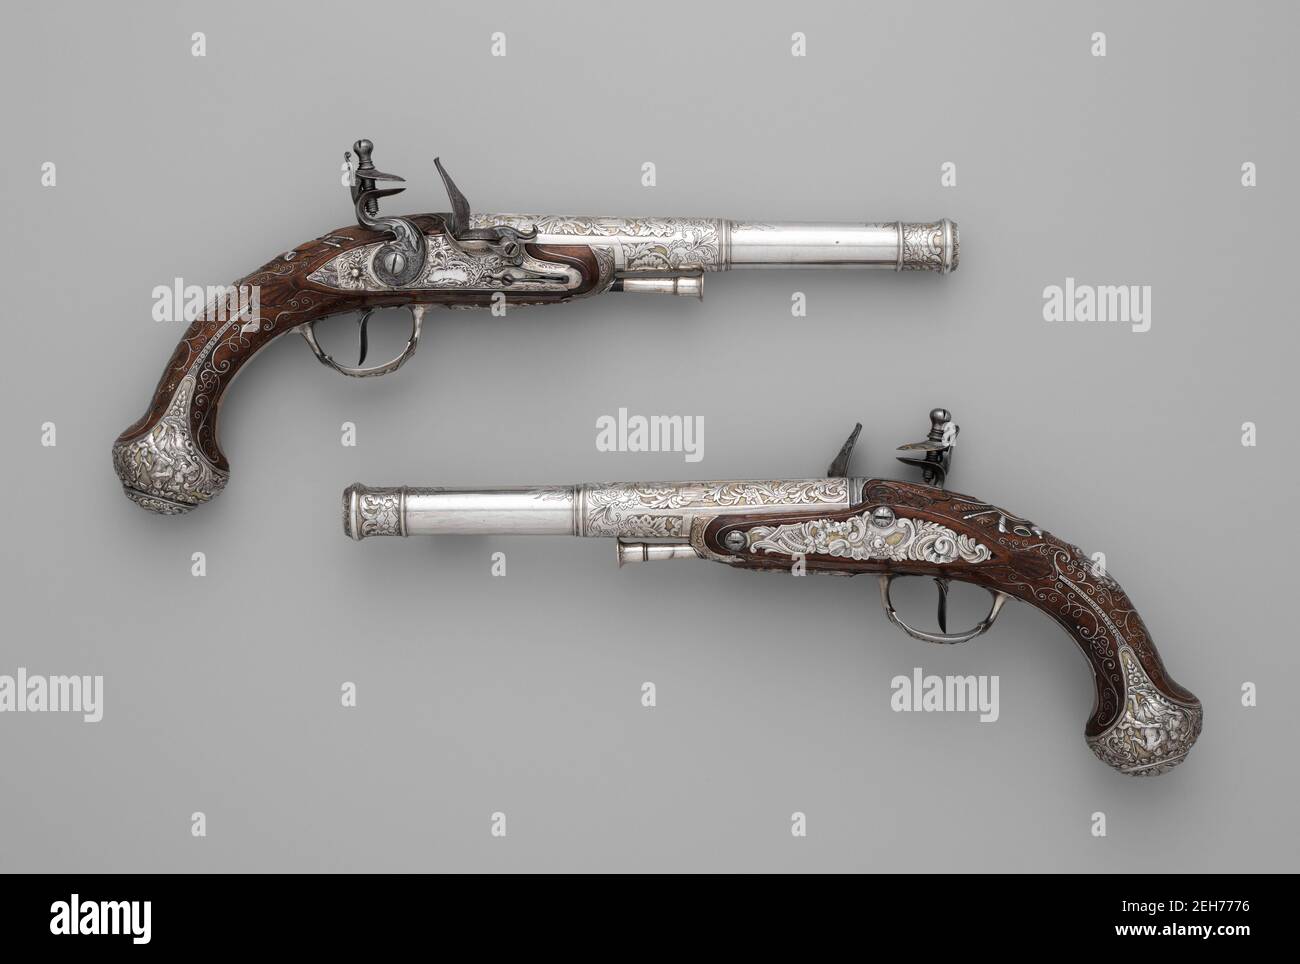 Pair of Flintlock Pistols, Indian, Lucknow, and possibly British, London, ca. 1786. Markings indicate the pistols were made in the Arsenal at Lucknow, India, under direction of Arsenal Superintendent Claude Martin. Stock Photo